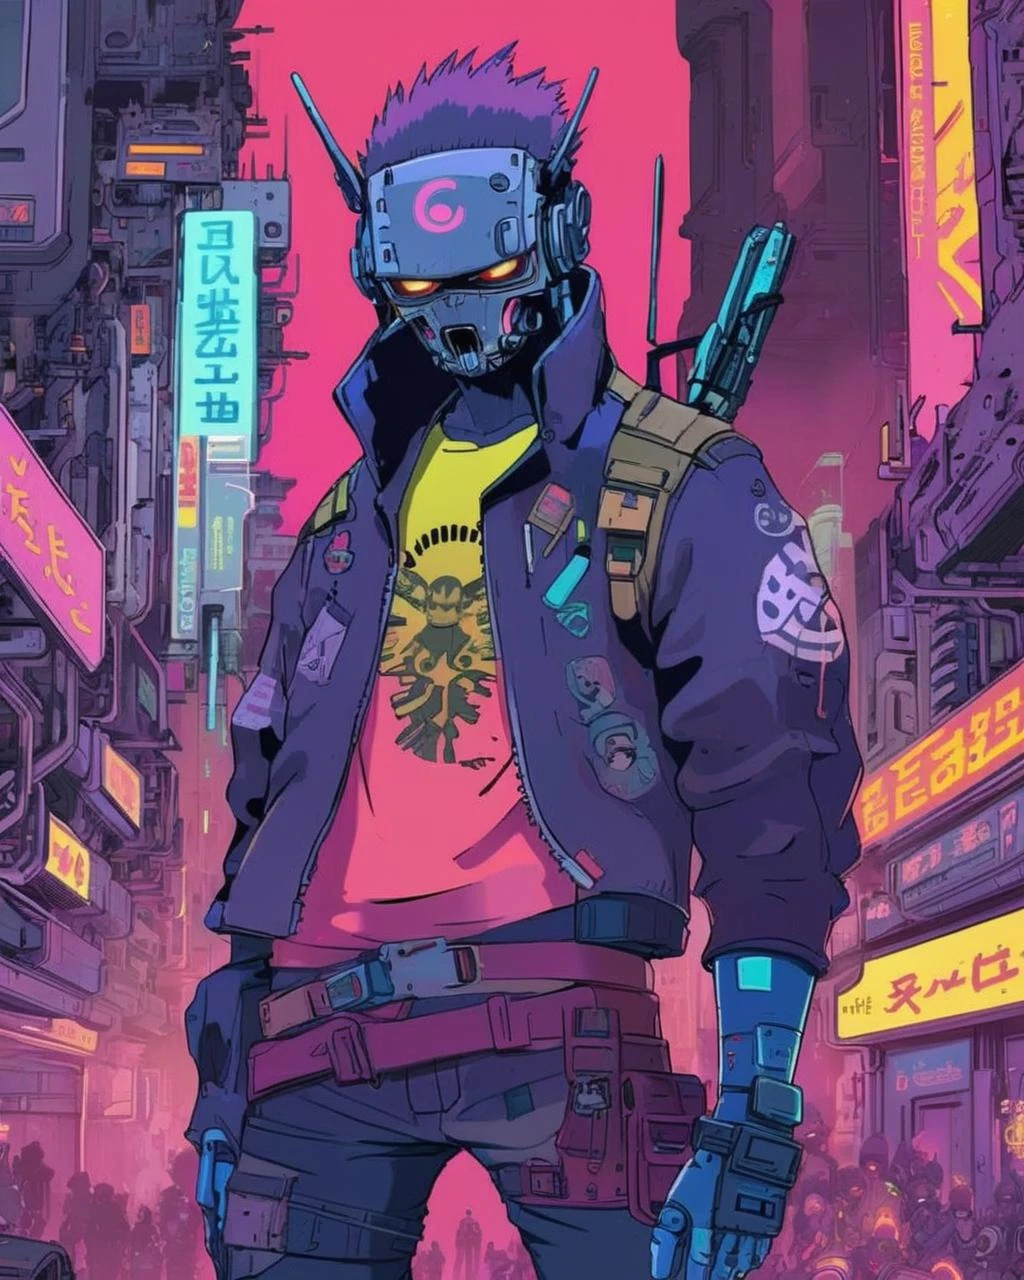 anime, A final stand, rebels and cyber-enhanced heroes rallying against an onslaught of digital monstrosities, the clash of worlds erupting in a blaze of neon and fury.,  cyberpunk, cyberpunk art, retrofuturism